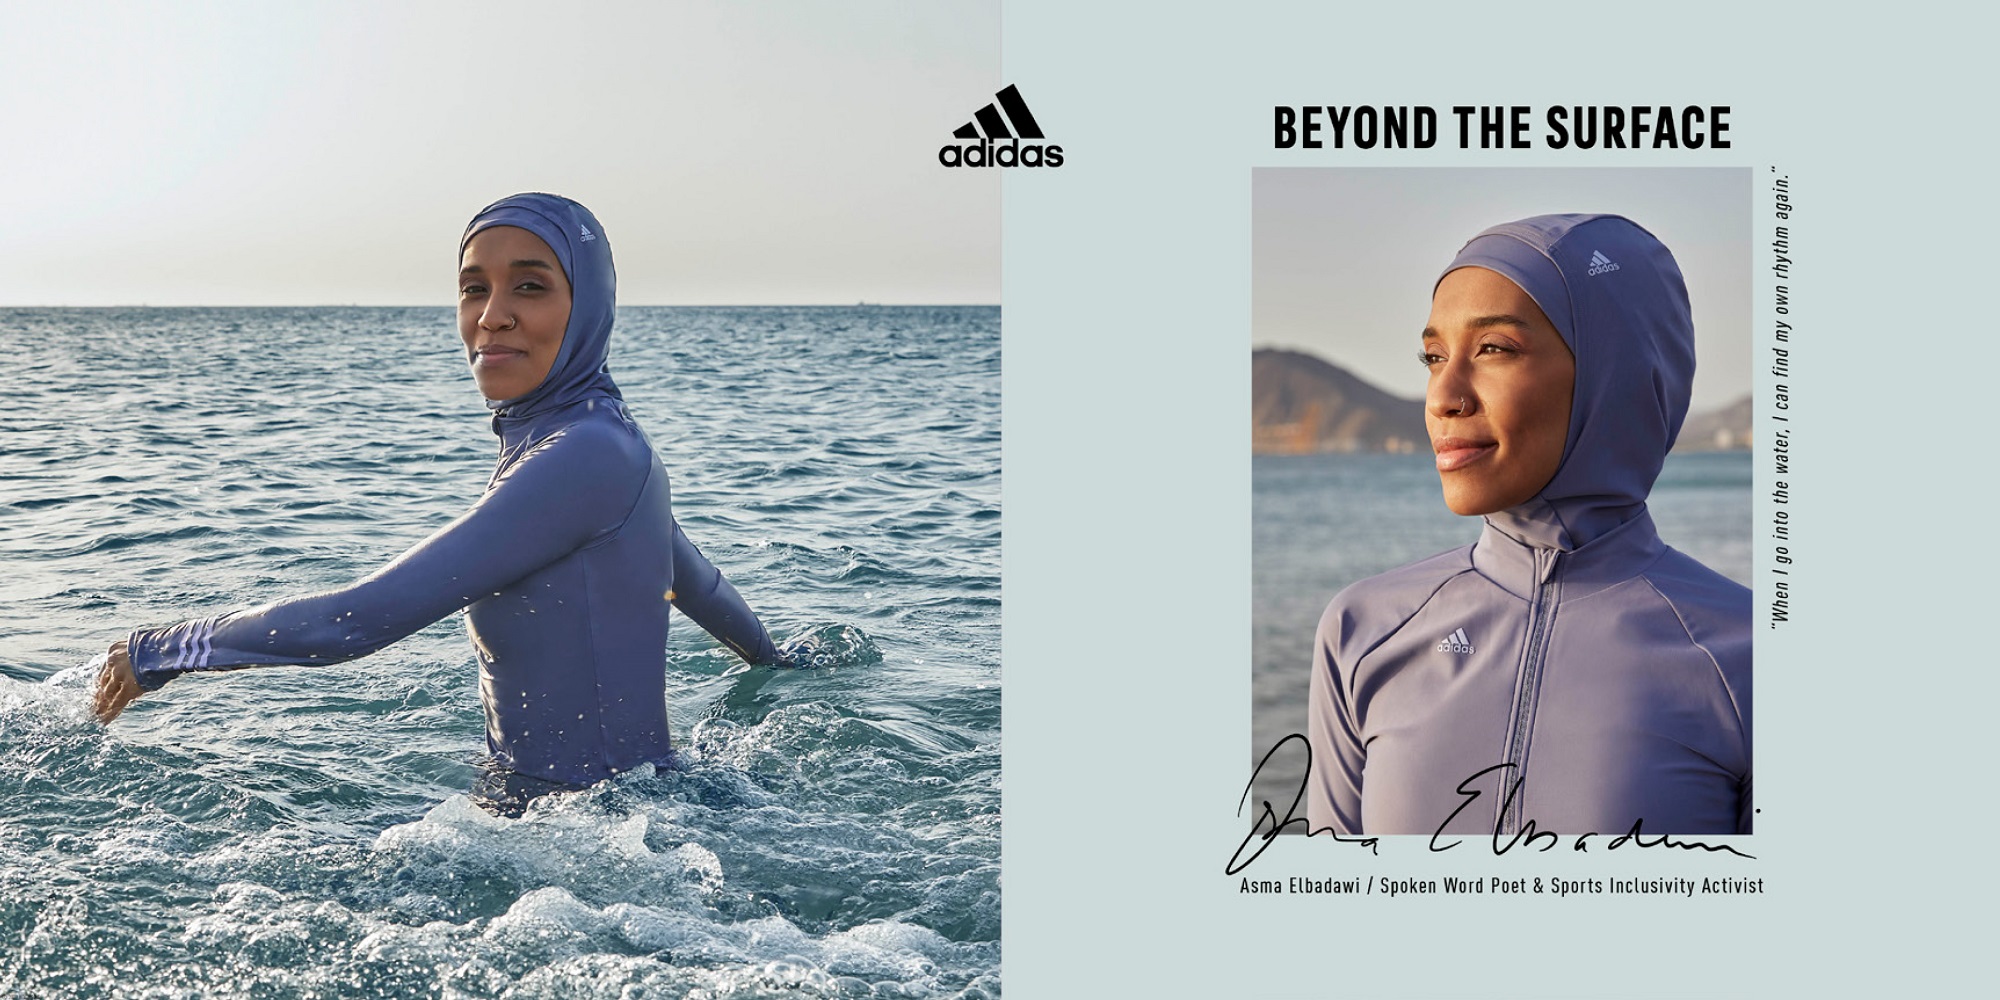 Adidas Reinforces Inclusivity in Swimming With Launch of Its First Full-Cover Swimwear Collection